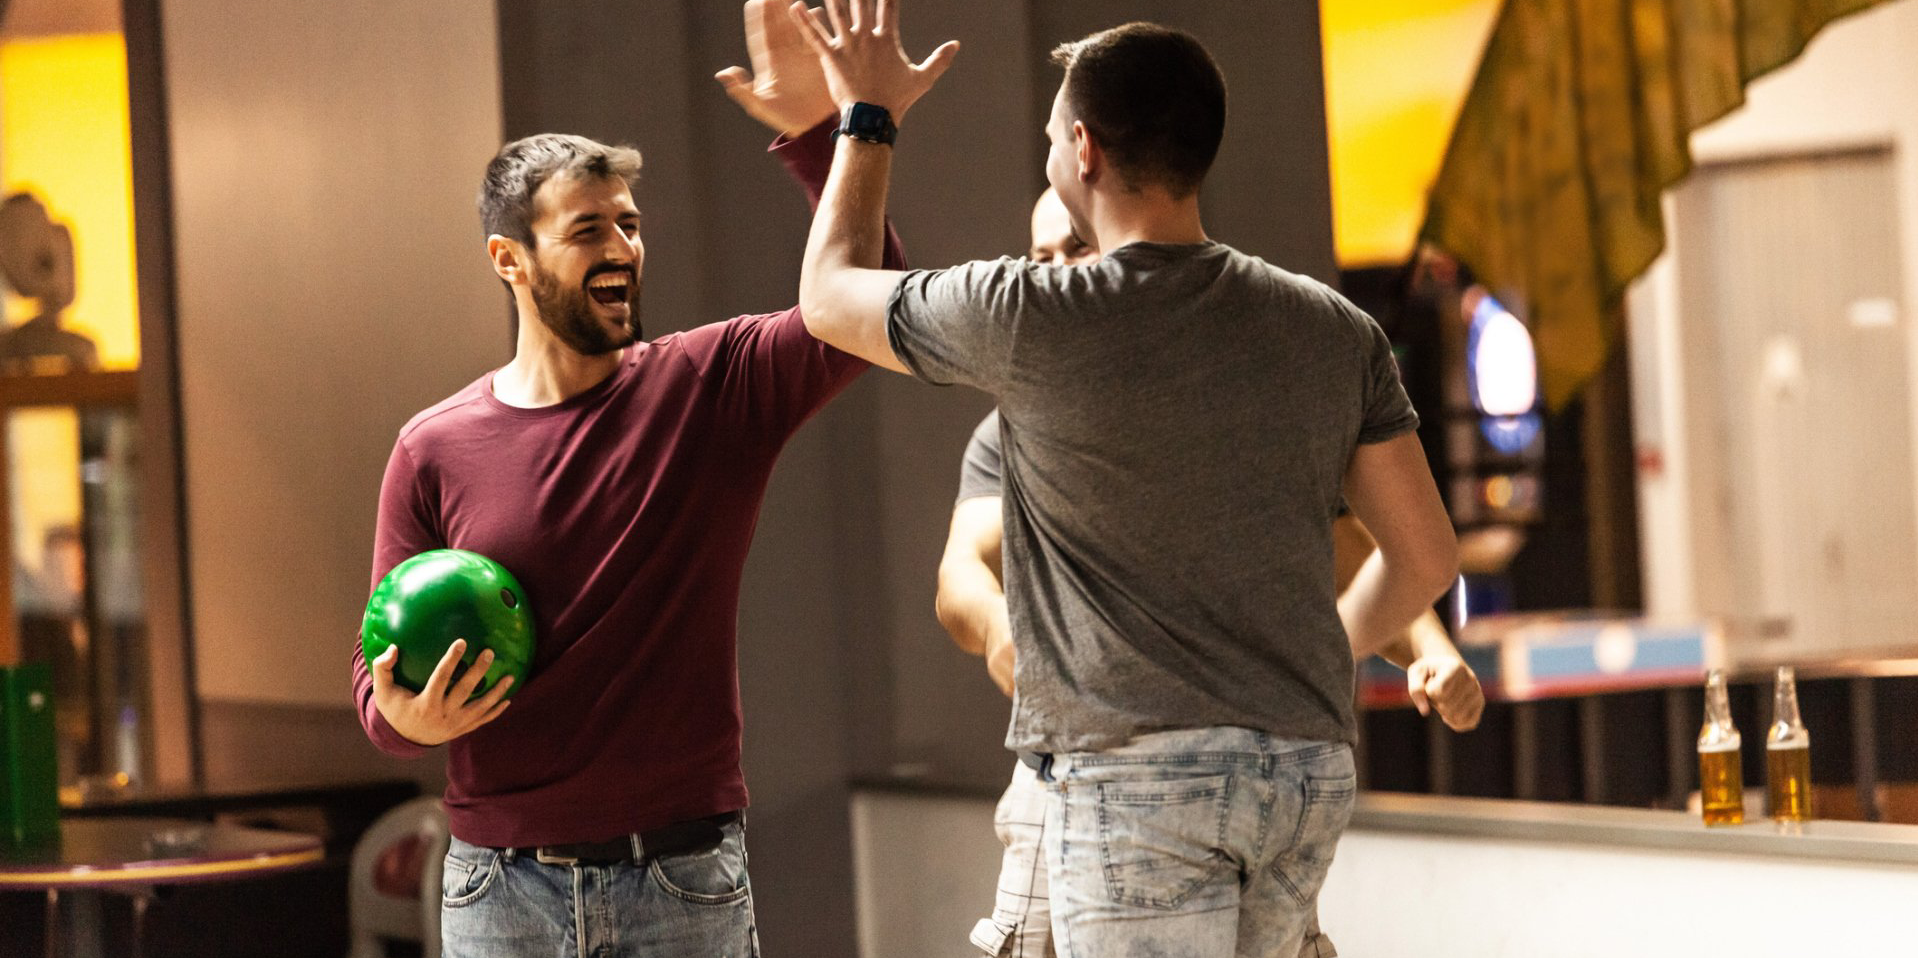 Two men are giving each other a high five while playing bowling.